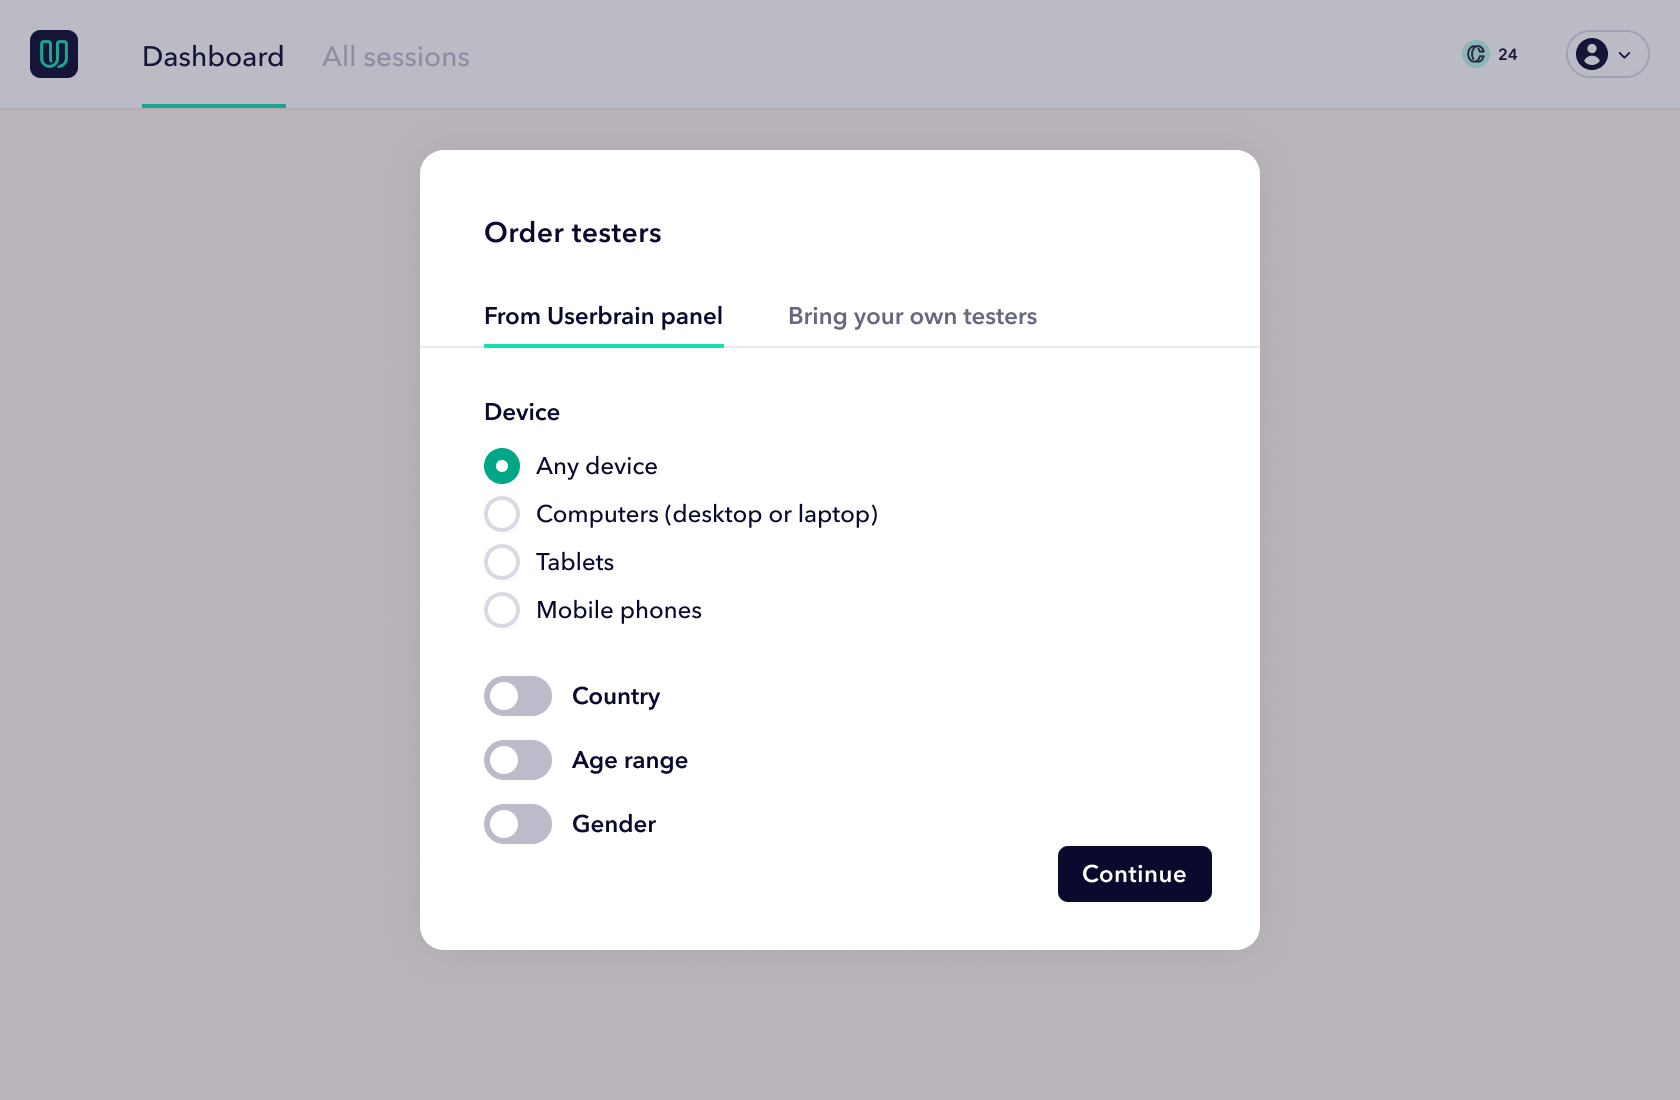 Modal to order remote user testers in the Userbrain dashboard interface